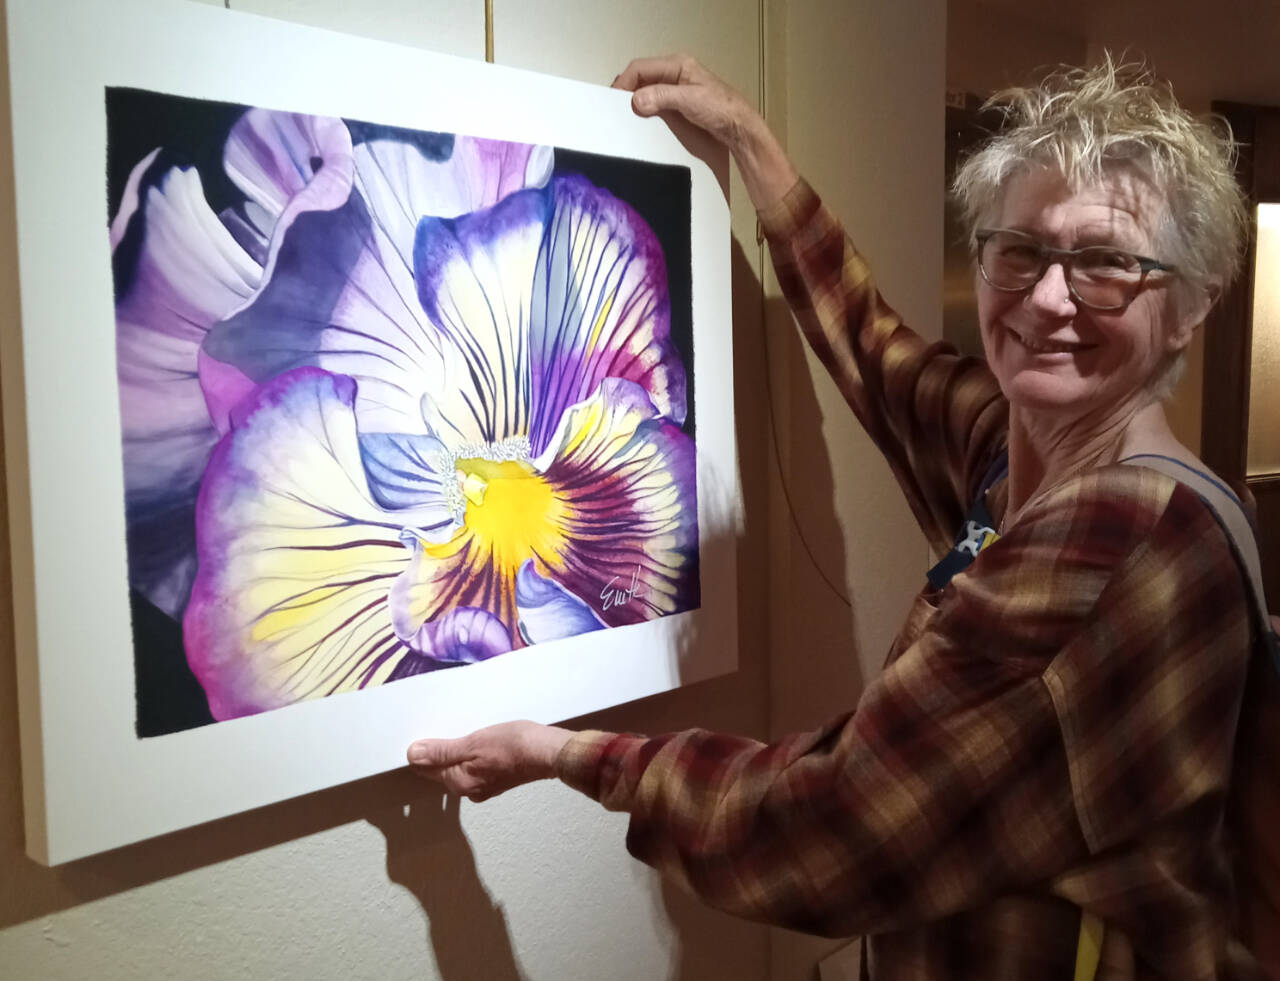 Photo courtesy of Peninsula Fiber Artists
Sequim artist Susan Melka, pictured here hanging a piece by Evette Allerdings, is one of 18 regional textile artists to be exhibited in “Color Play.”